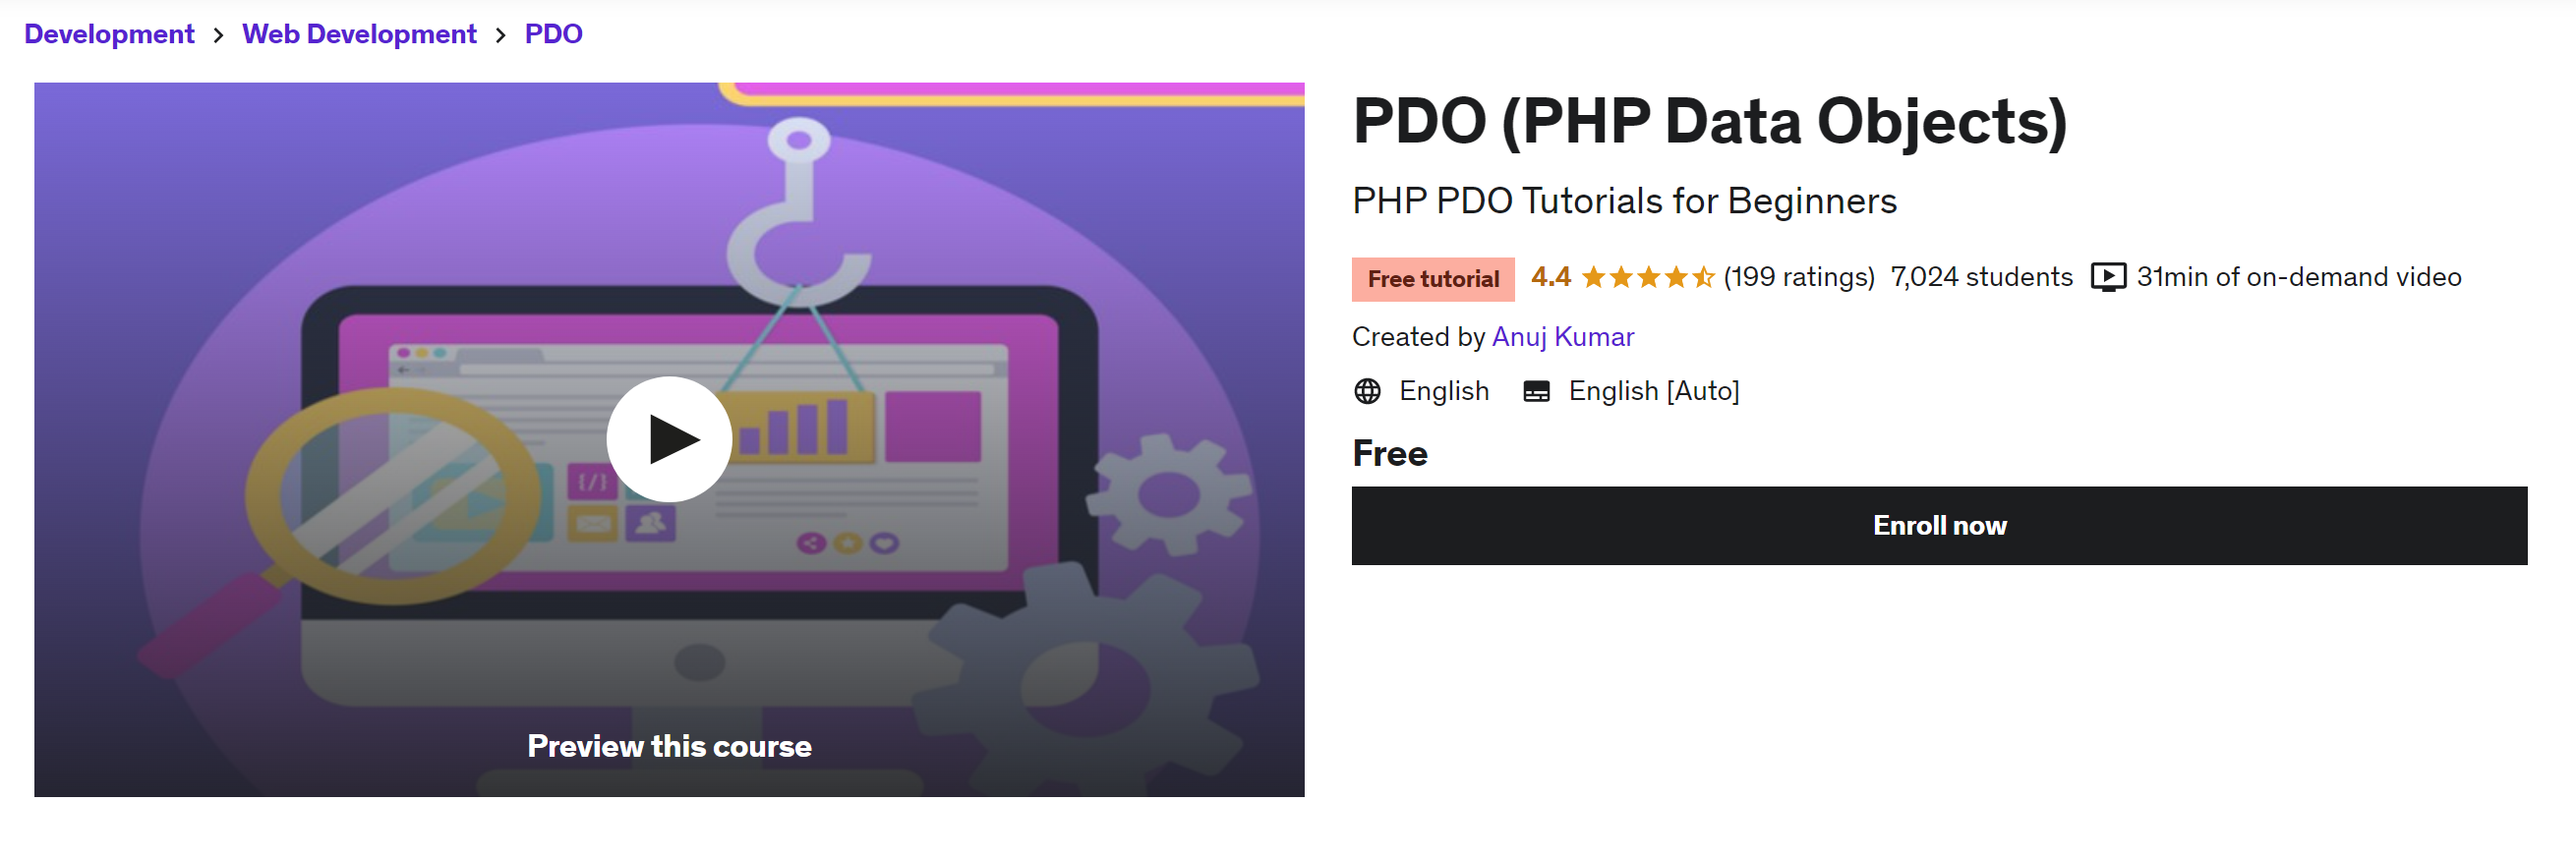 PDO (PHP Data Objects)